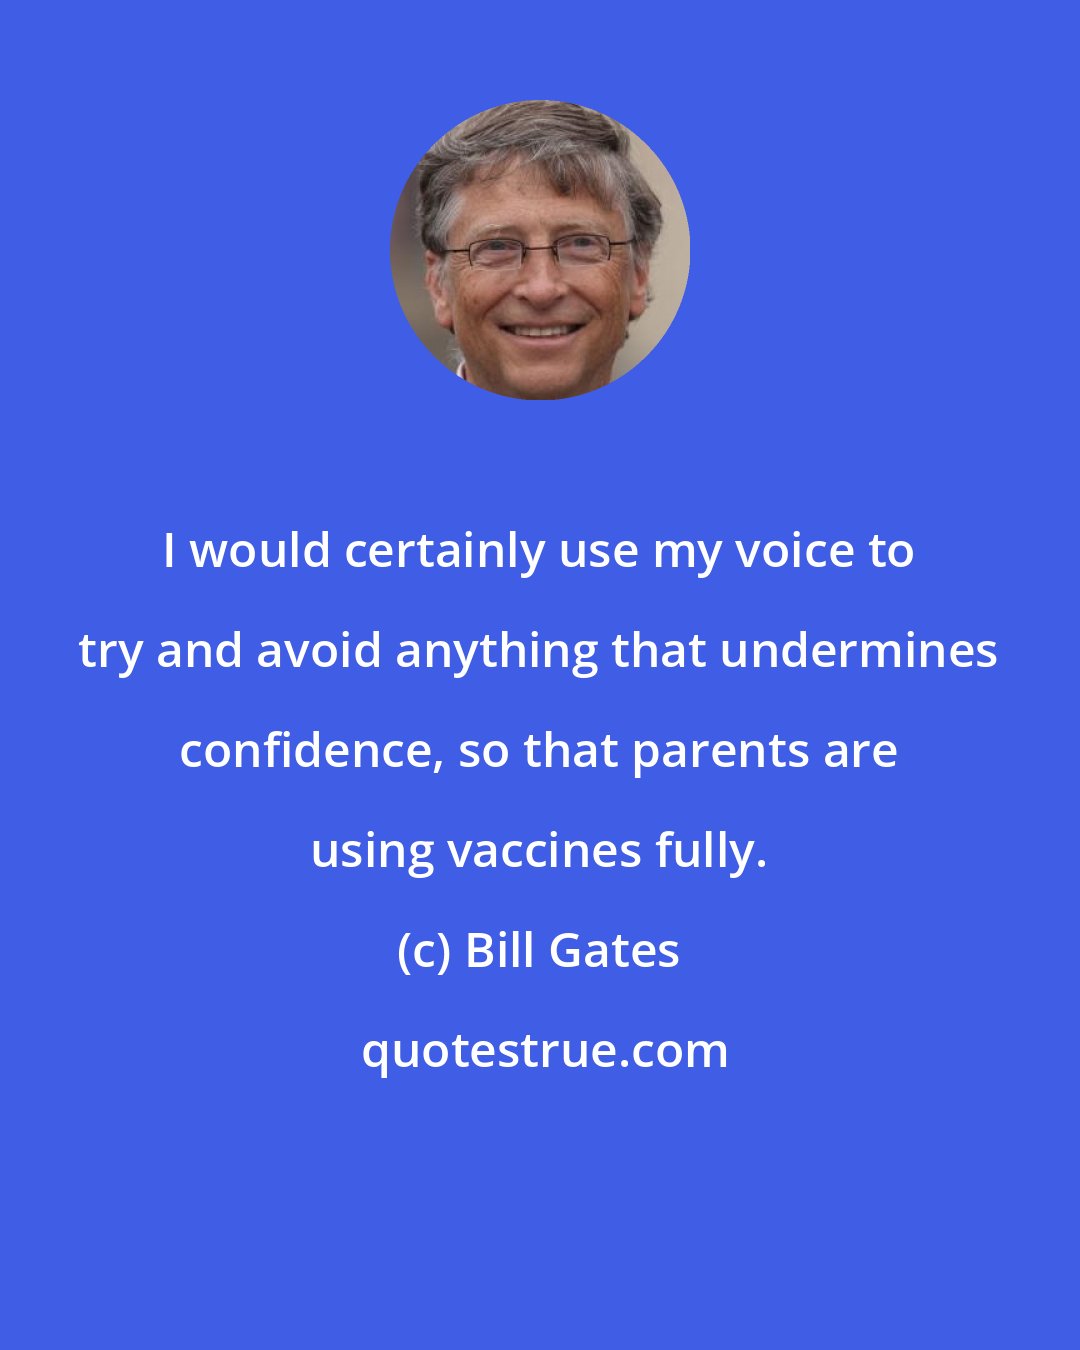 Bill Gates: I would certainly use my voice to try and avoid anything that undermines confidence, so that parents are using vaccines fully.